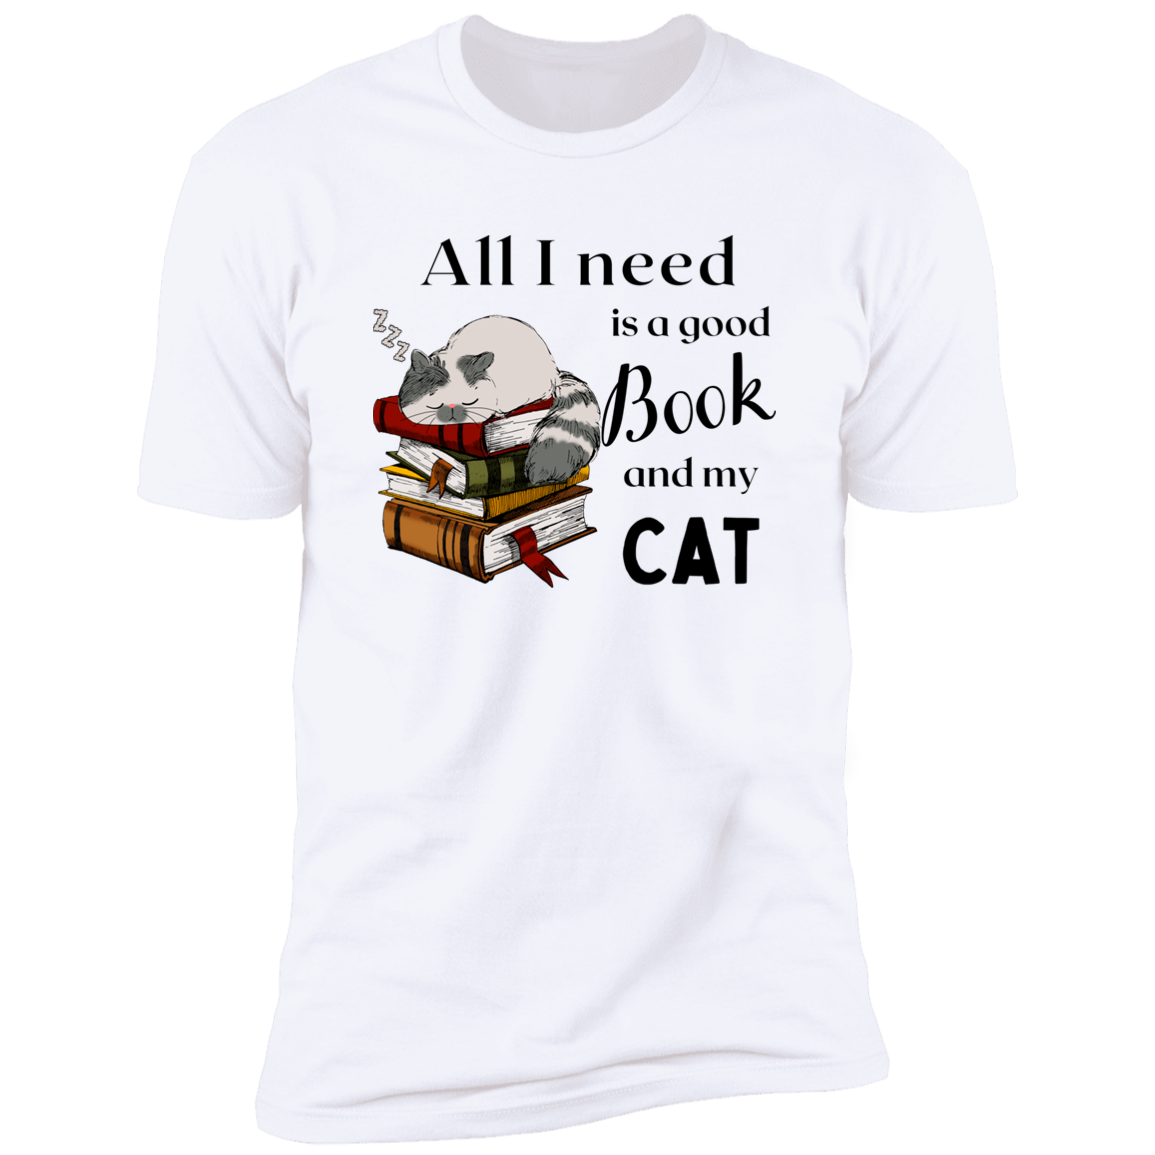 All I Need is a Good Book and My Cat t-shirt for humans, in white